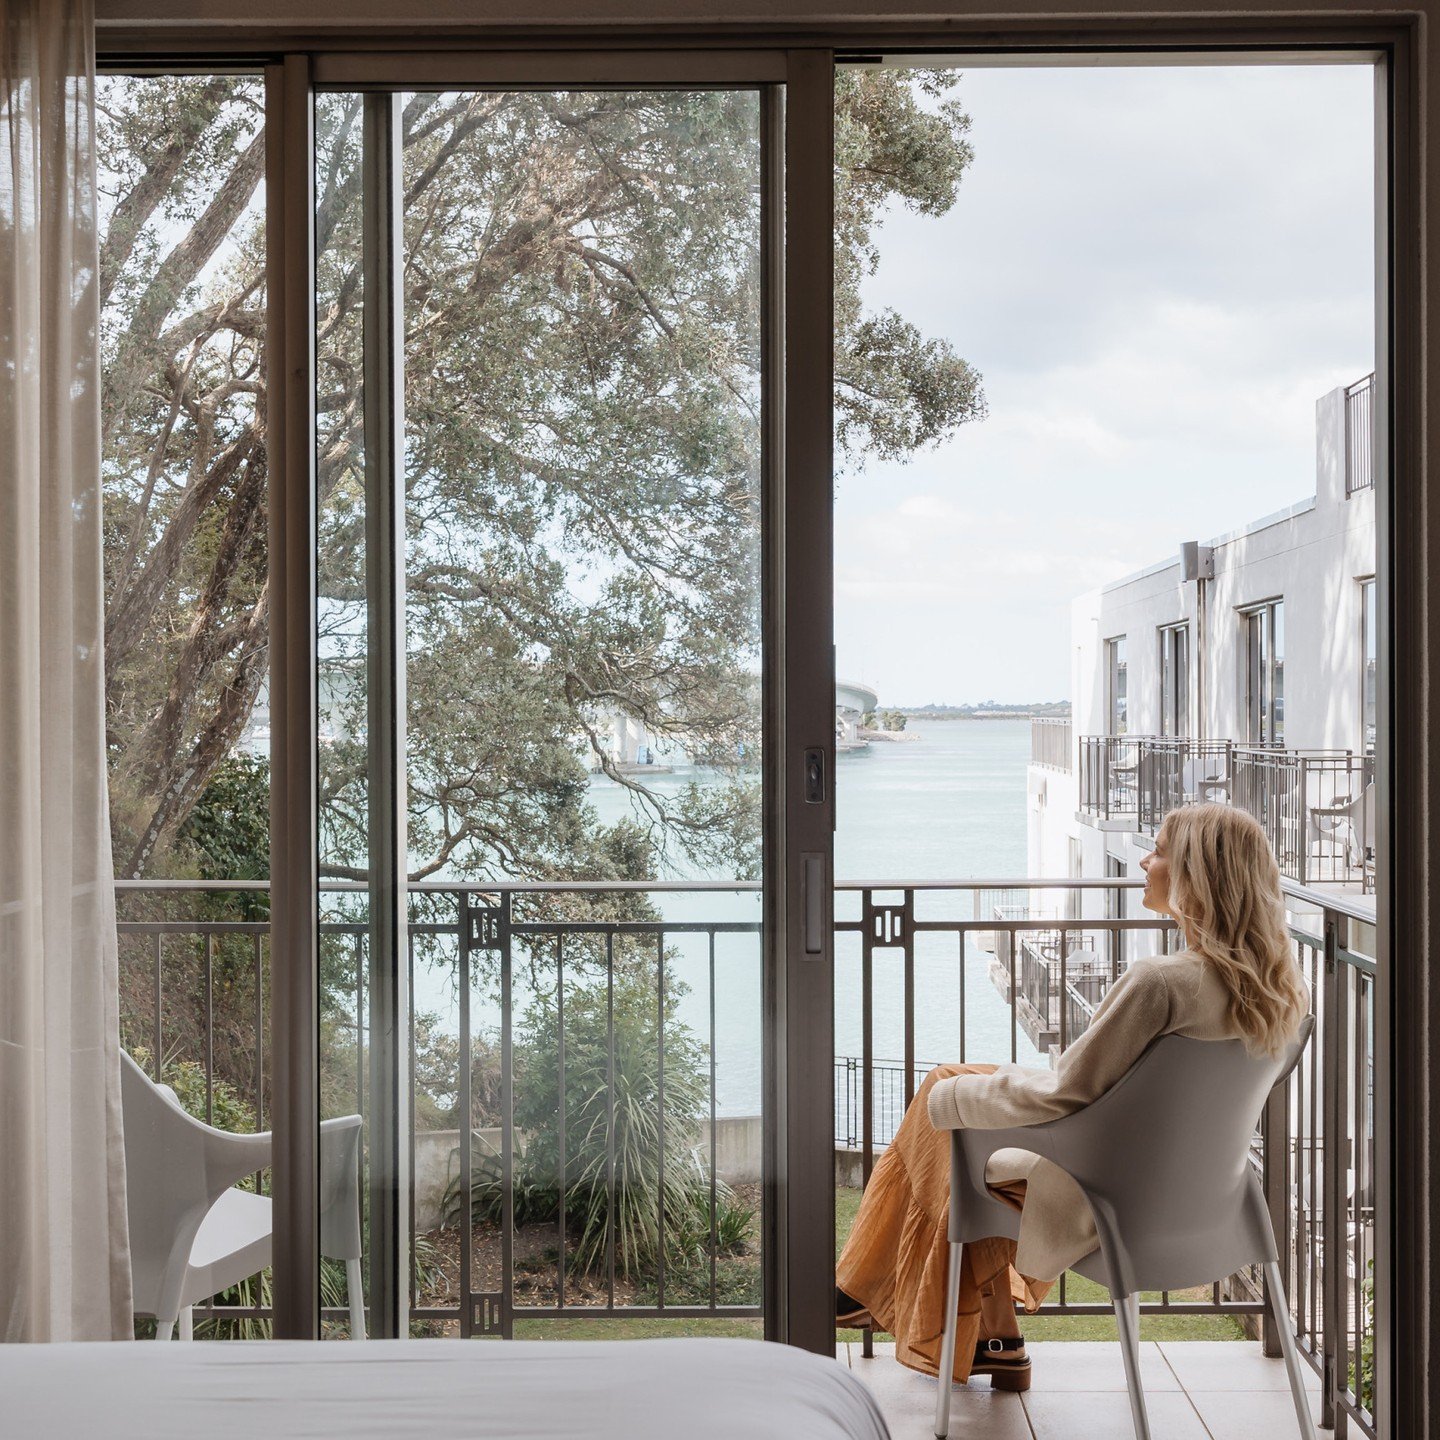 LOCALS! This one's for you... Indulge in a getaway without leaving town! Experience what it&rsquo;s like to stay at Trinity Wharf &amp; have the gorgeous glistening harbour on your doorstep with this exclusive limited time offer. 

Use the code 'BOPL